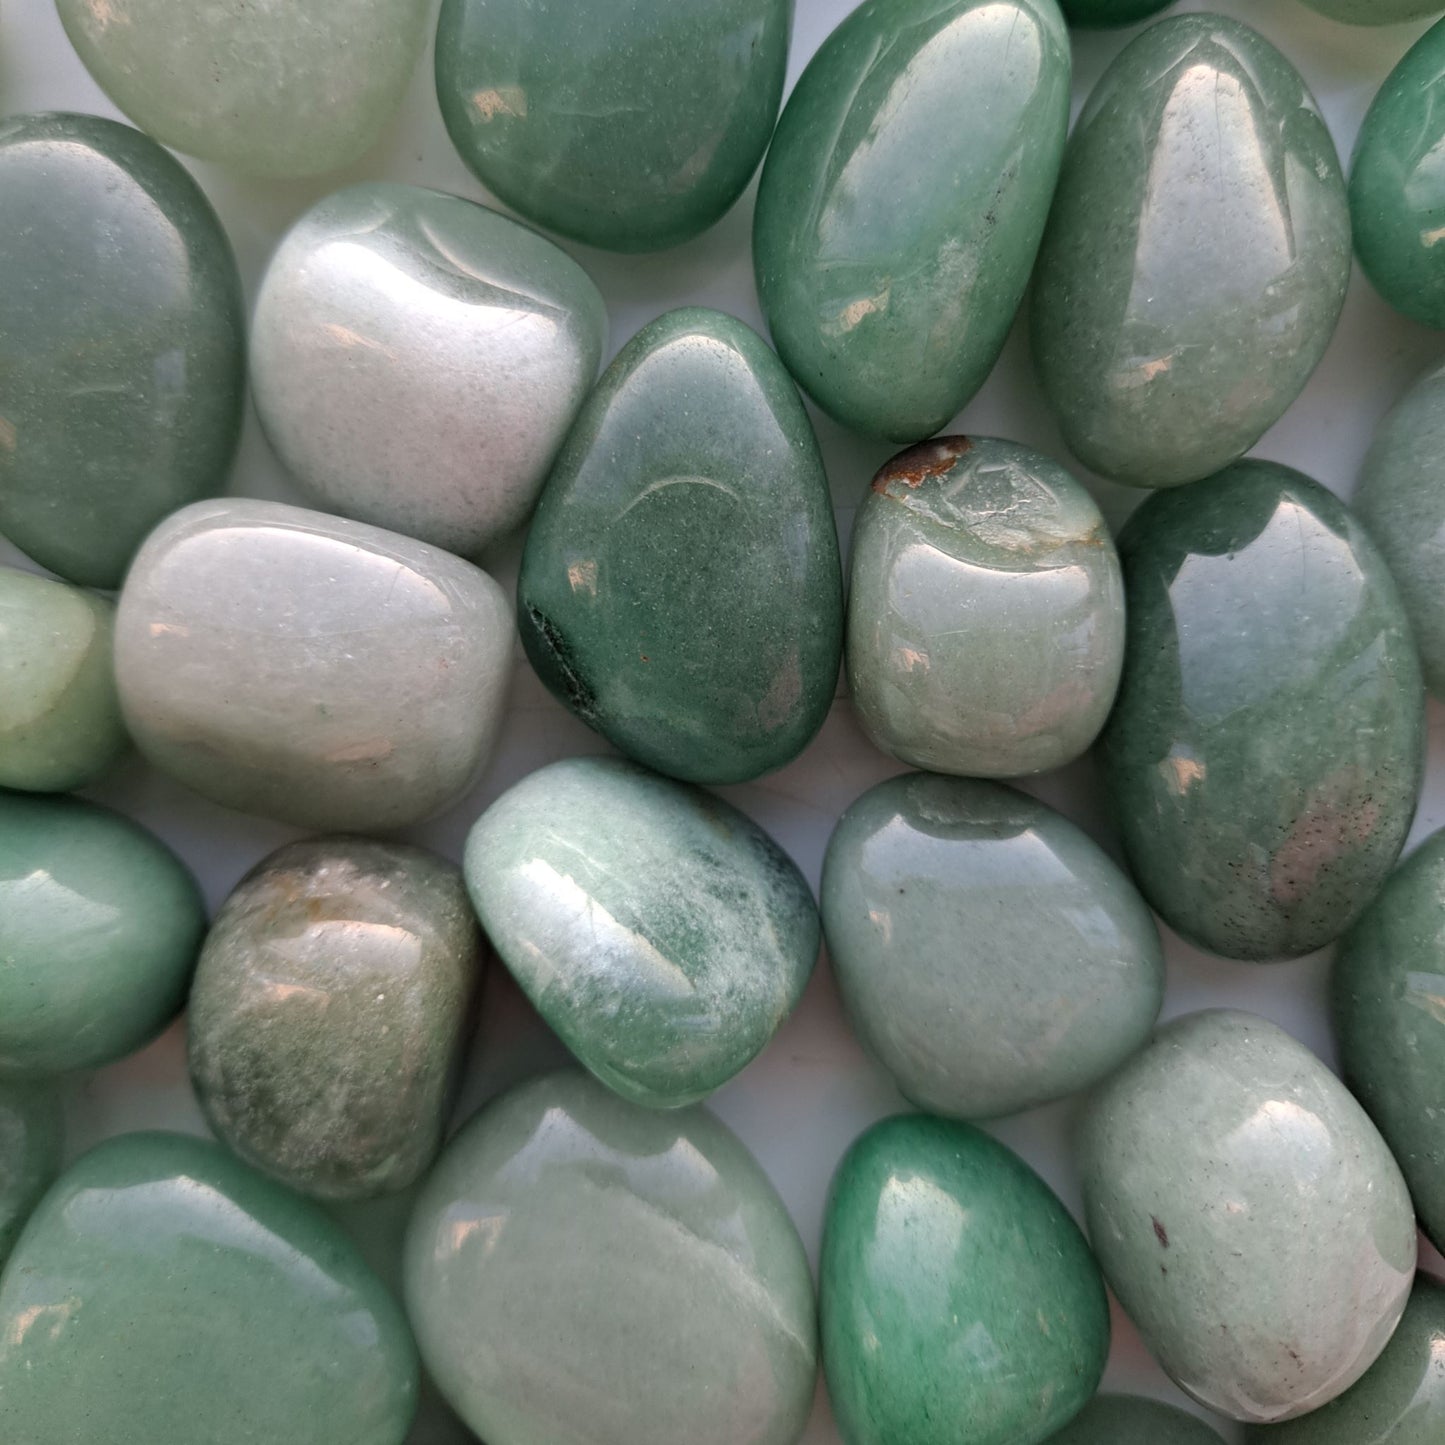 Dumi's Crystals | Green Aventurine Tumbled Stones (Growth & Harmony) | A collection of Green Aventurine Tumbled Stones, each a testament to nature's beauty. Green Aventurine promotes emotional well-being, inner peace & new beginnings. Scatter them in your home or workspace to cultivate a space overflowing with positive energy and growth.